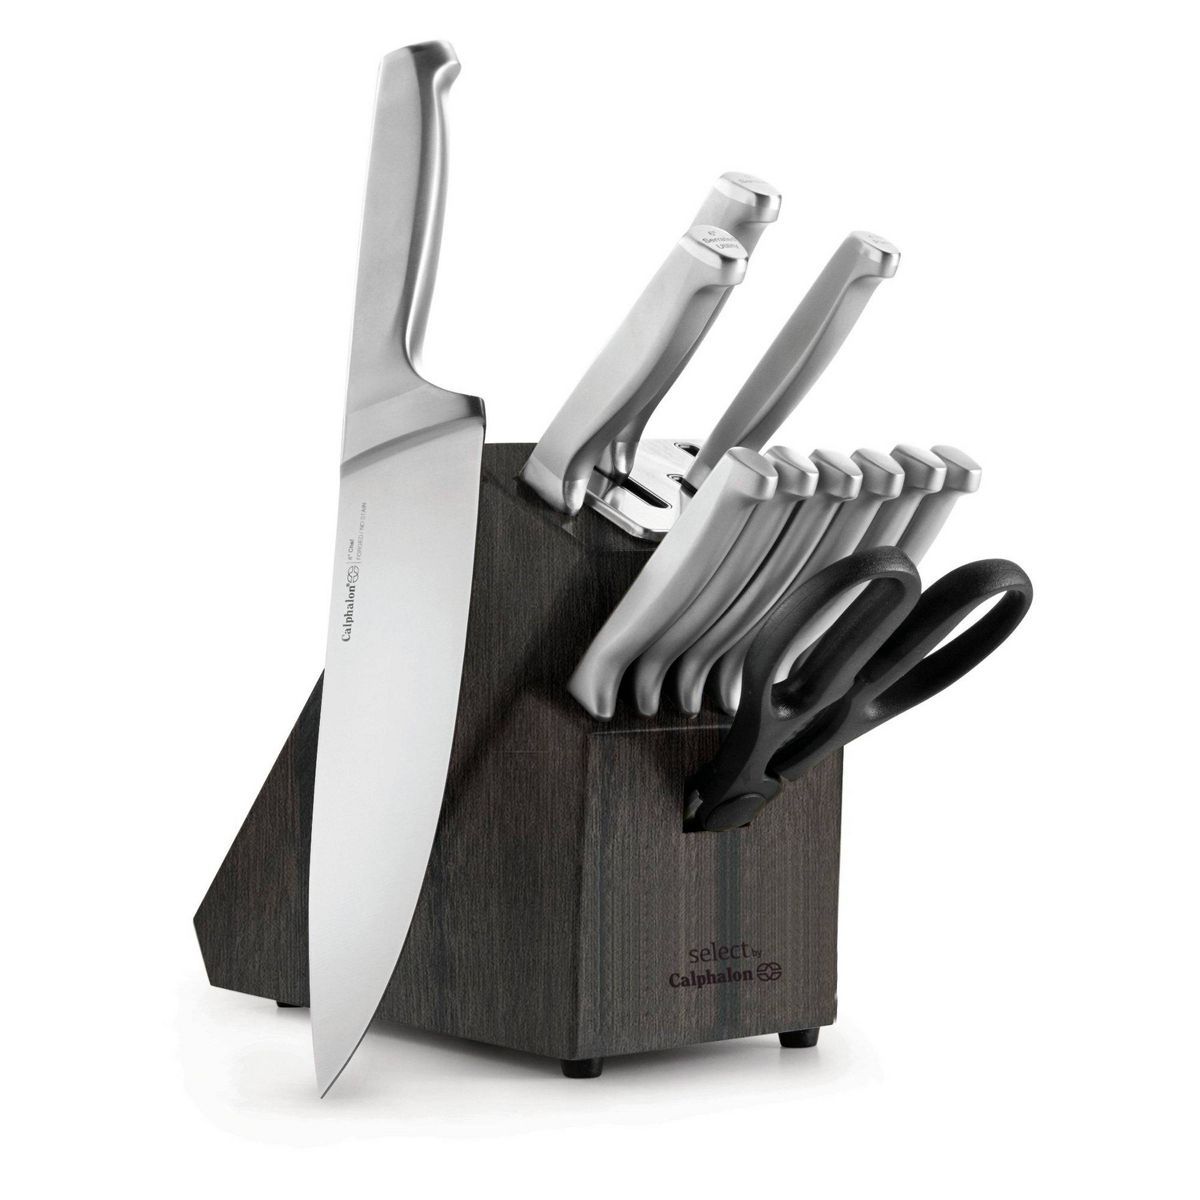 Select by Calphalon 12pc Stainless Steel Self-Sharpening Cutlery Set | Target